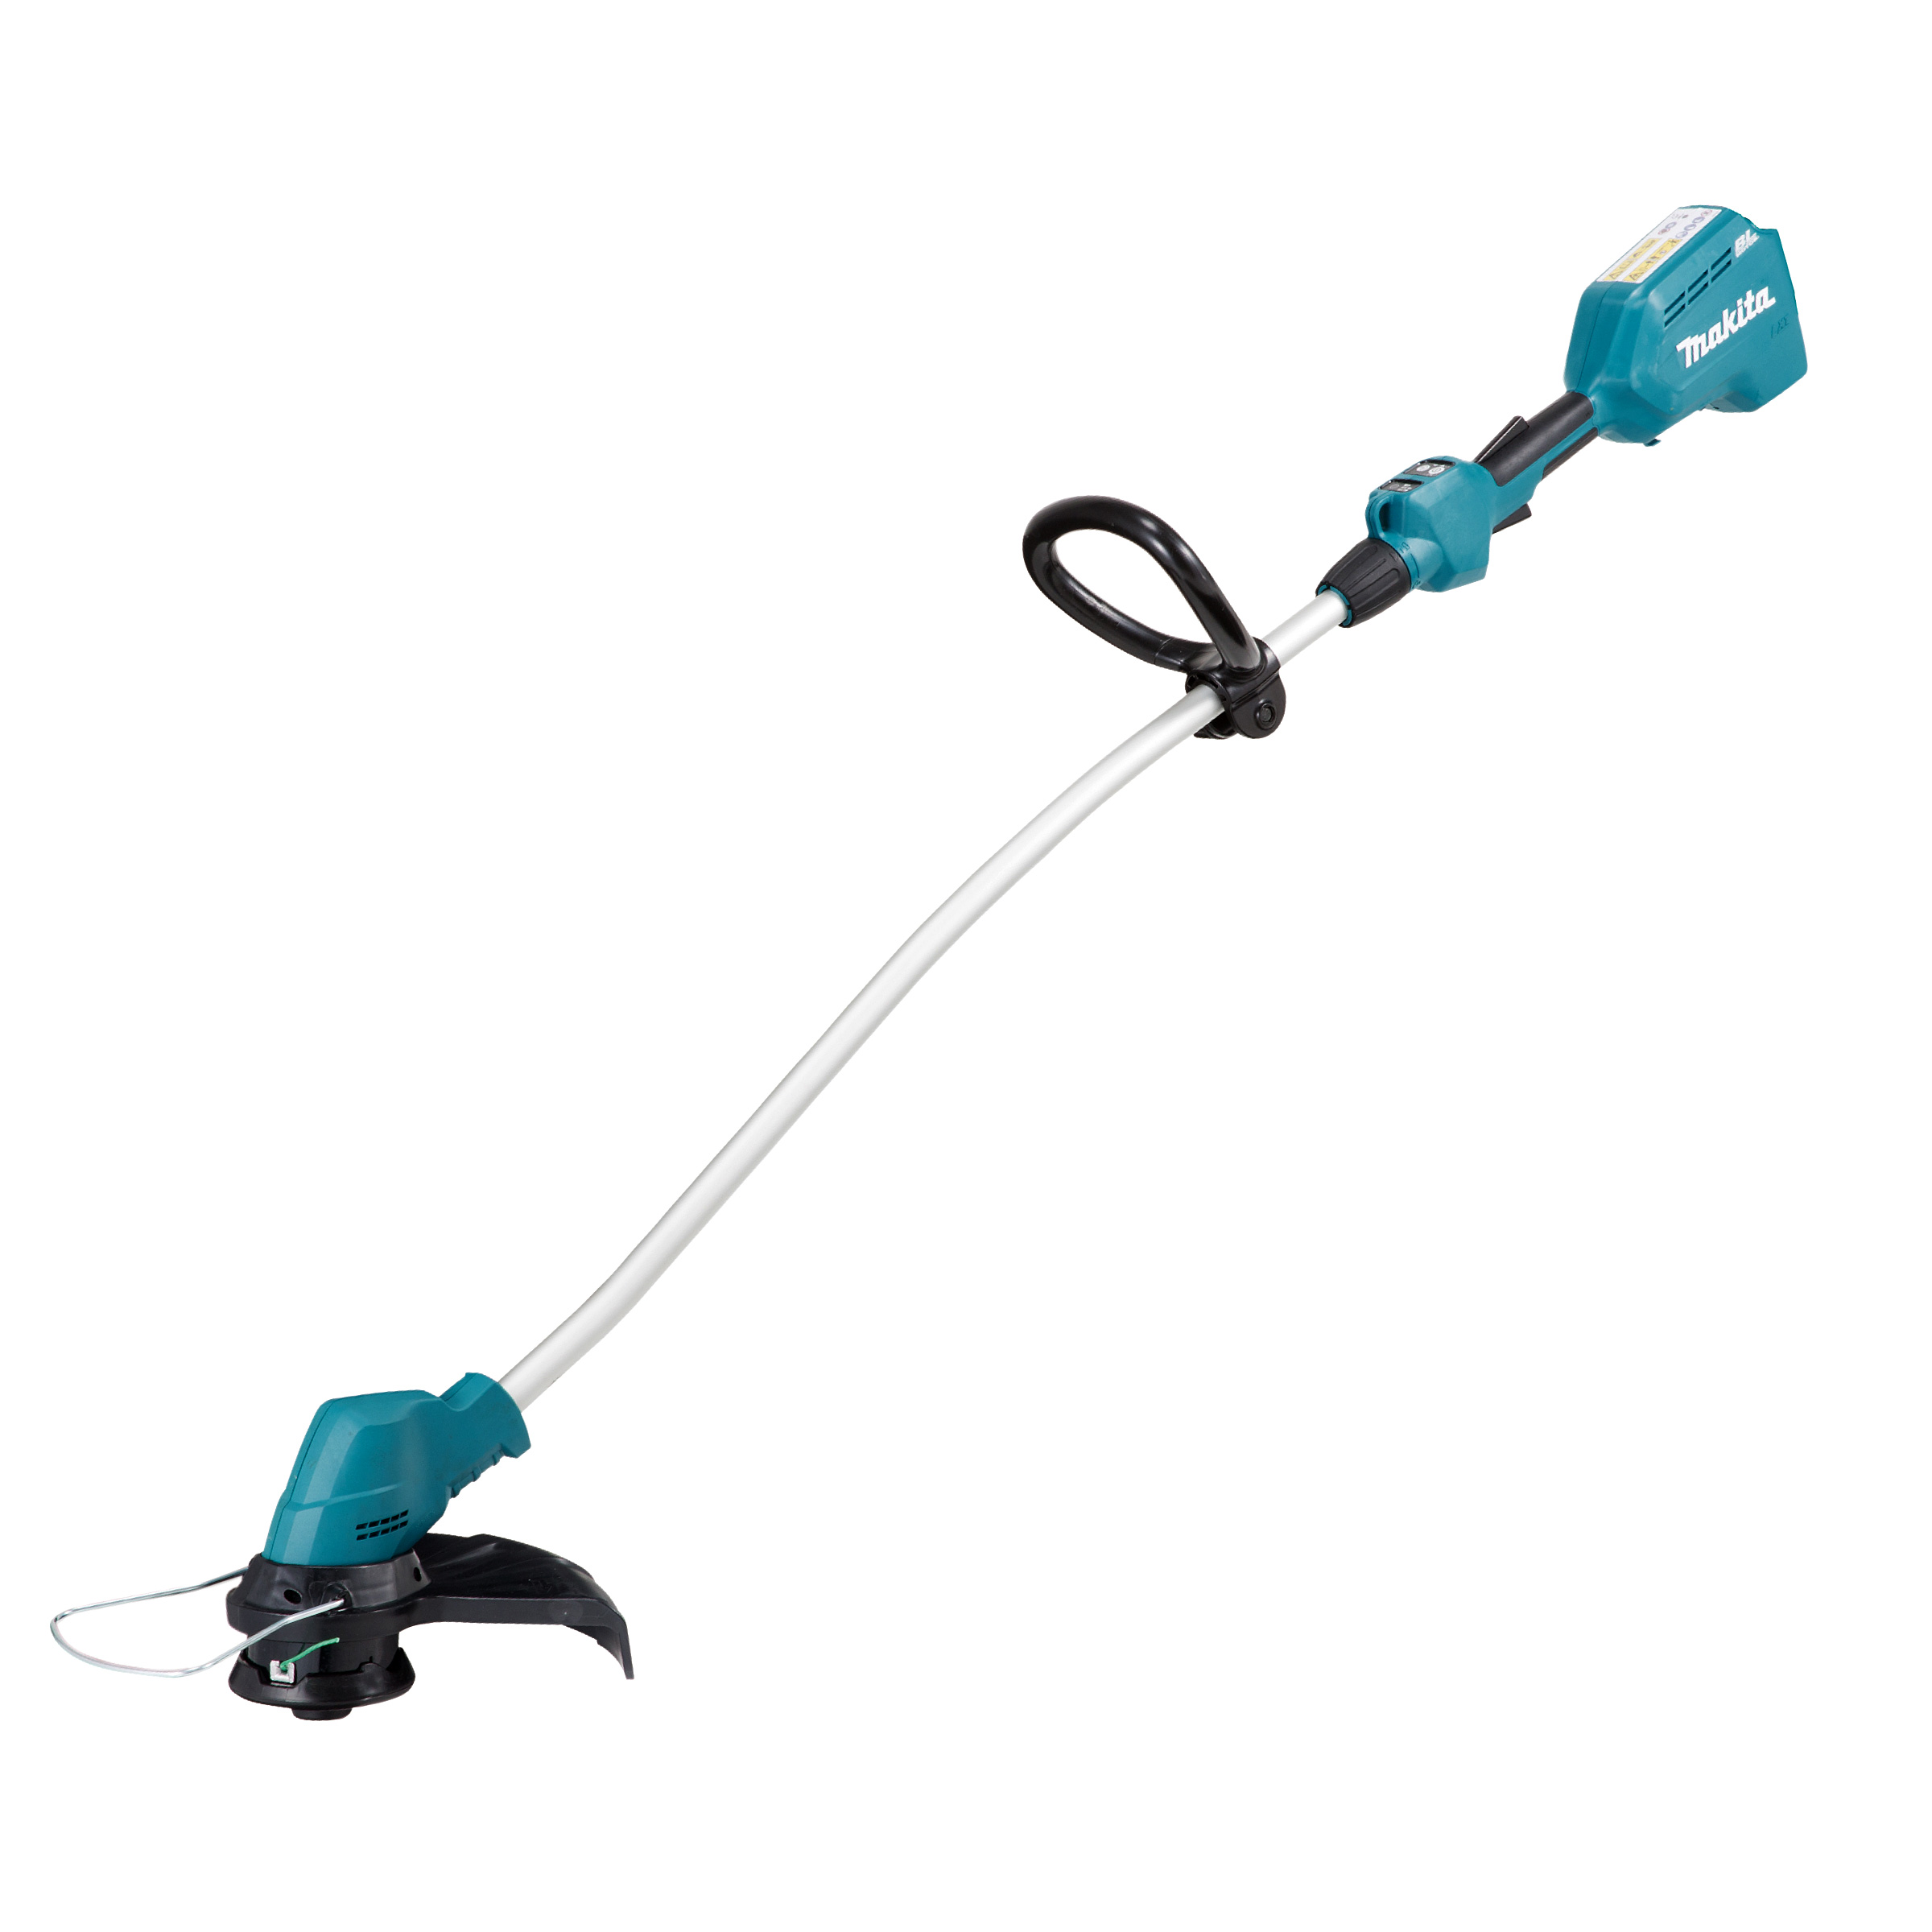 Makita DUR184LZ 18V Bent Shaft Line Trimmer (Body Only) - Click Image to Close